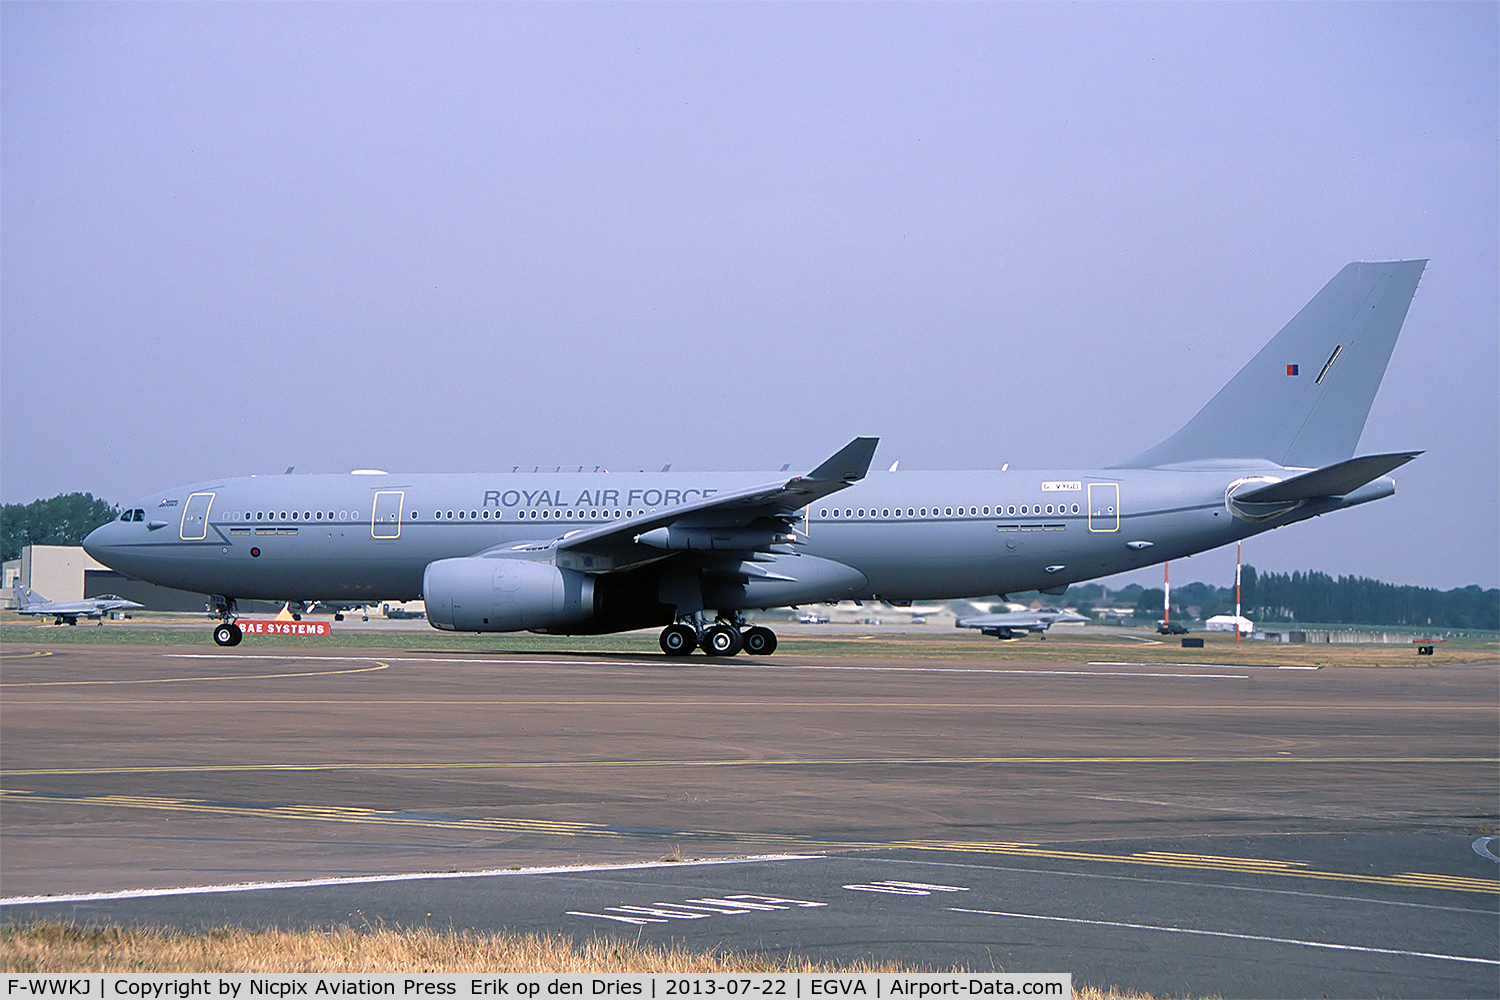 F-WWKJ, 2009 Airbus KC3 Voyager (A330-243MRTT) C/N 1033, Voyager KC.3 G-VYGO was later delivered to the RAF as ZZ336